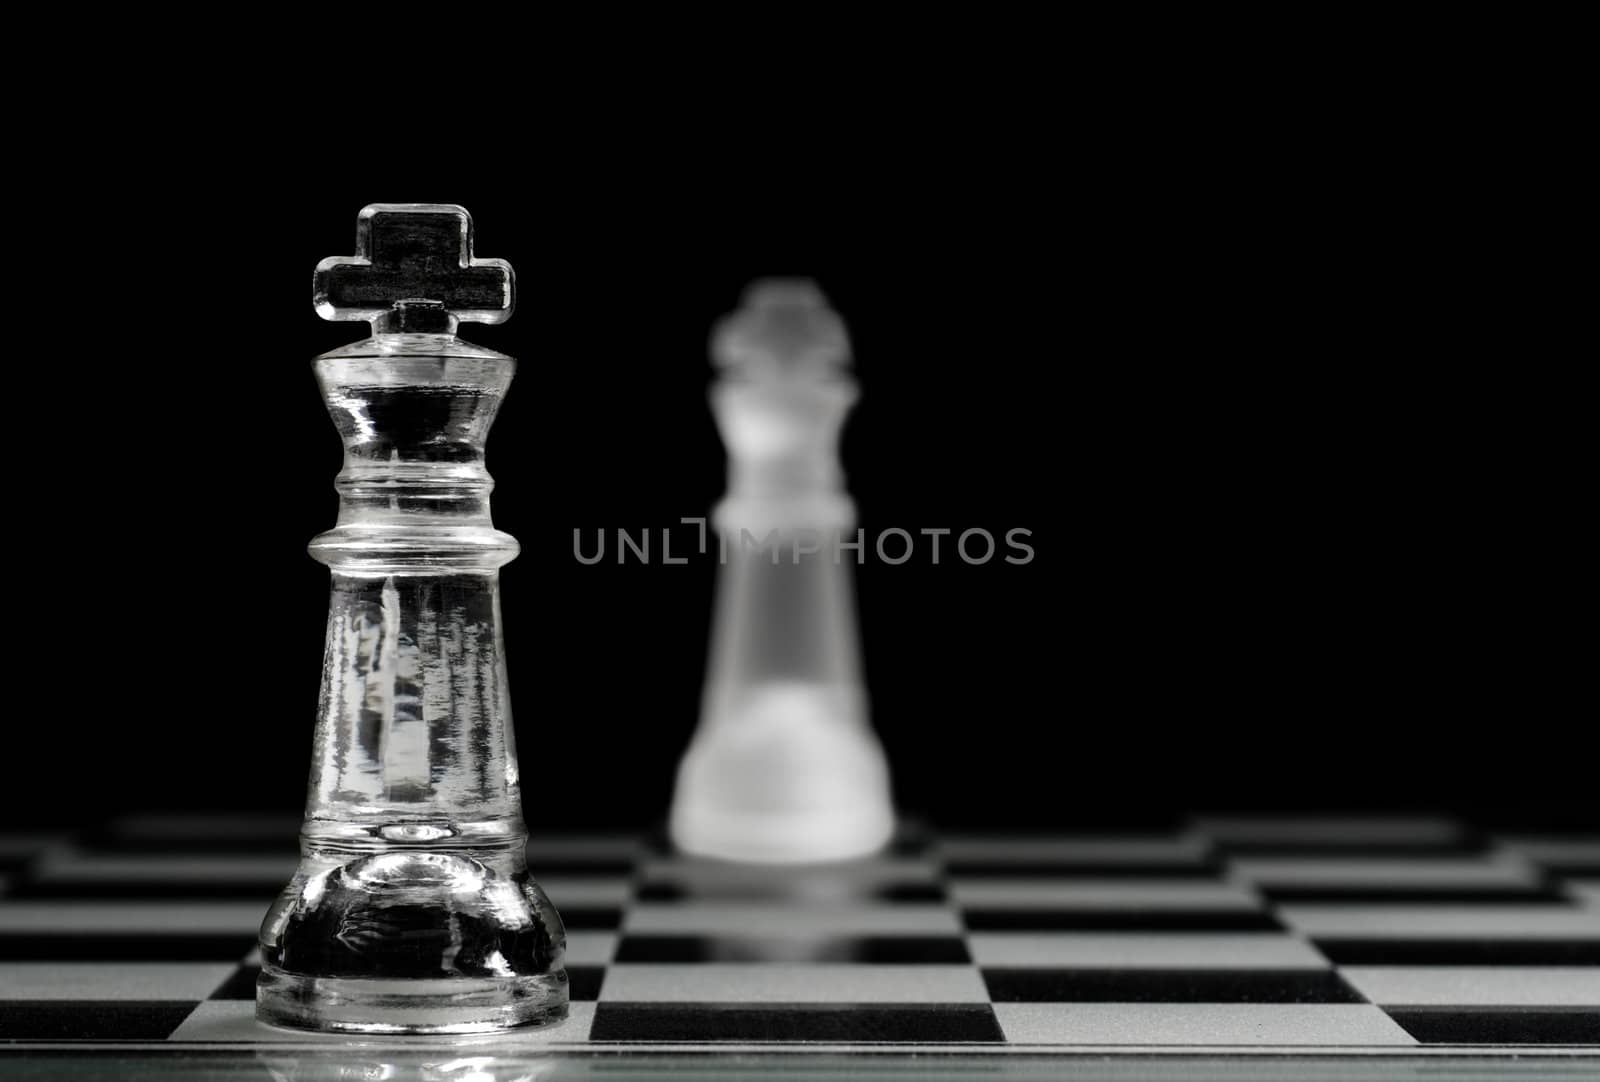 Kings facing each other, foreground king with selective focus